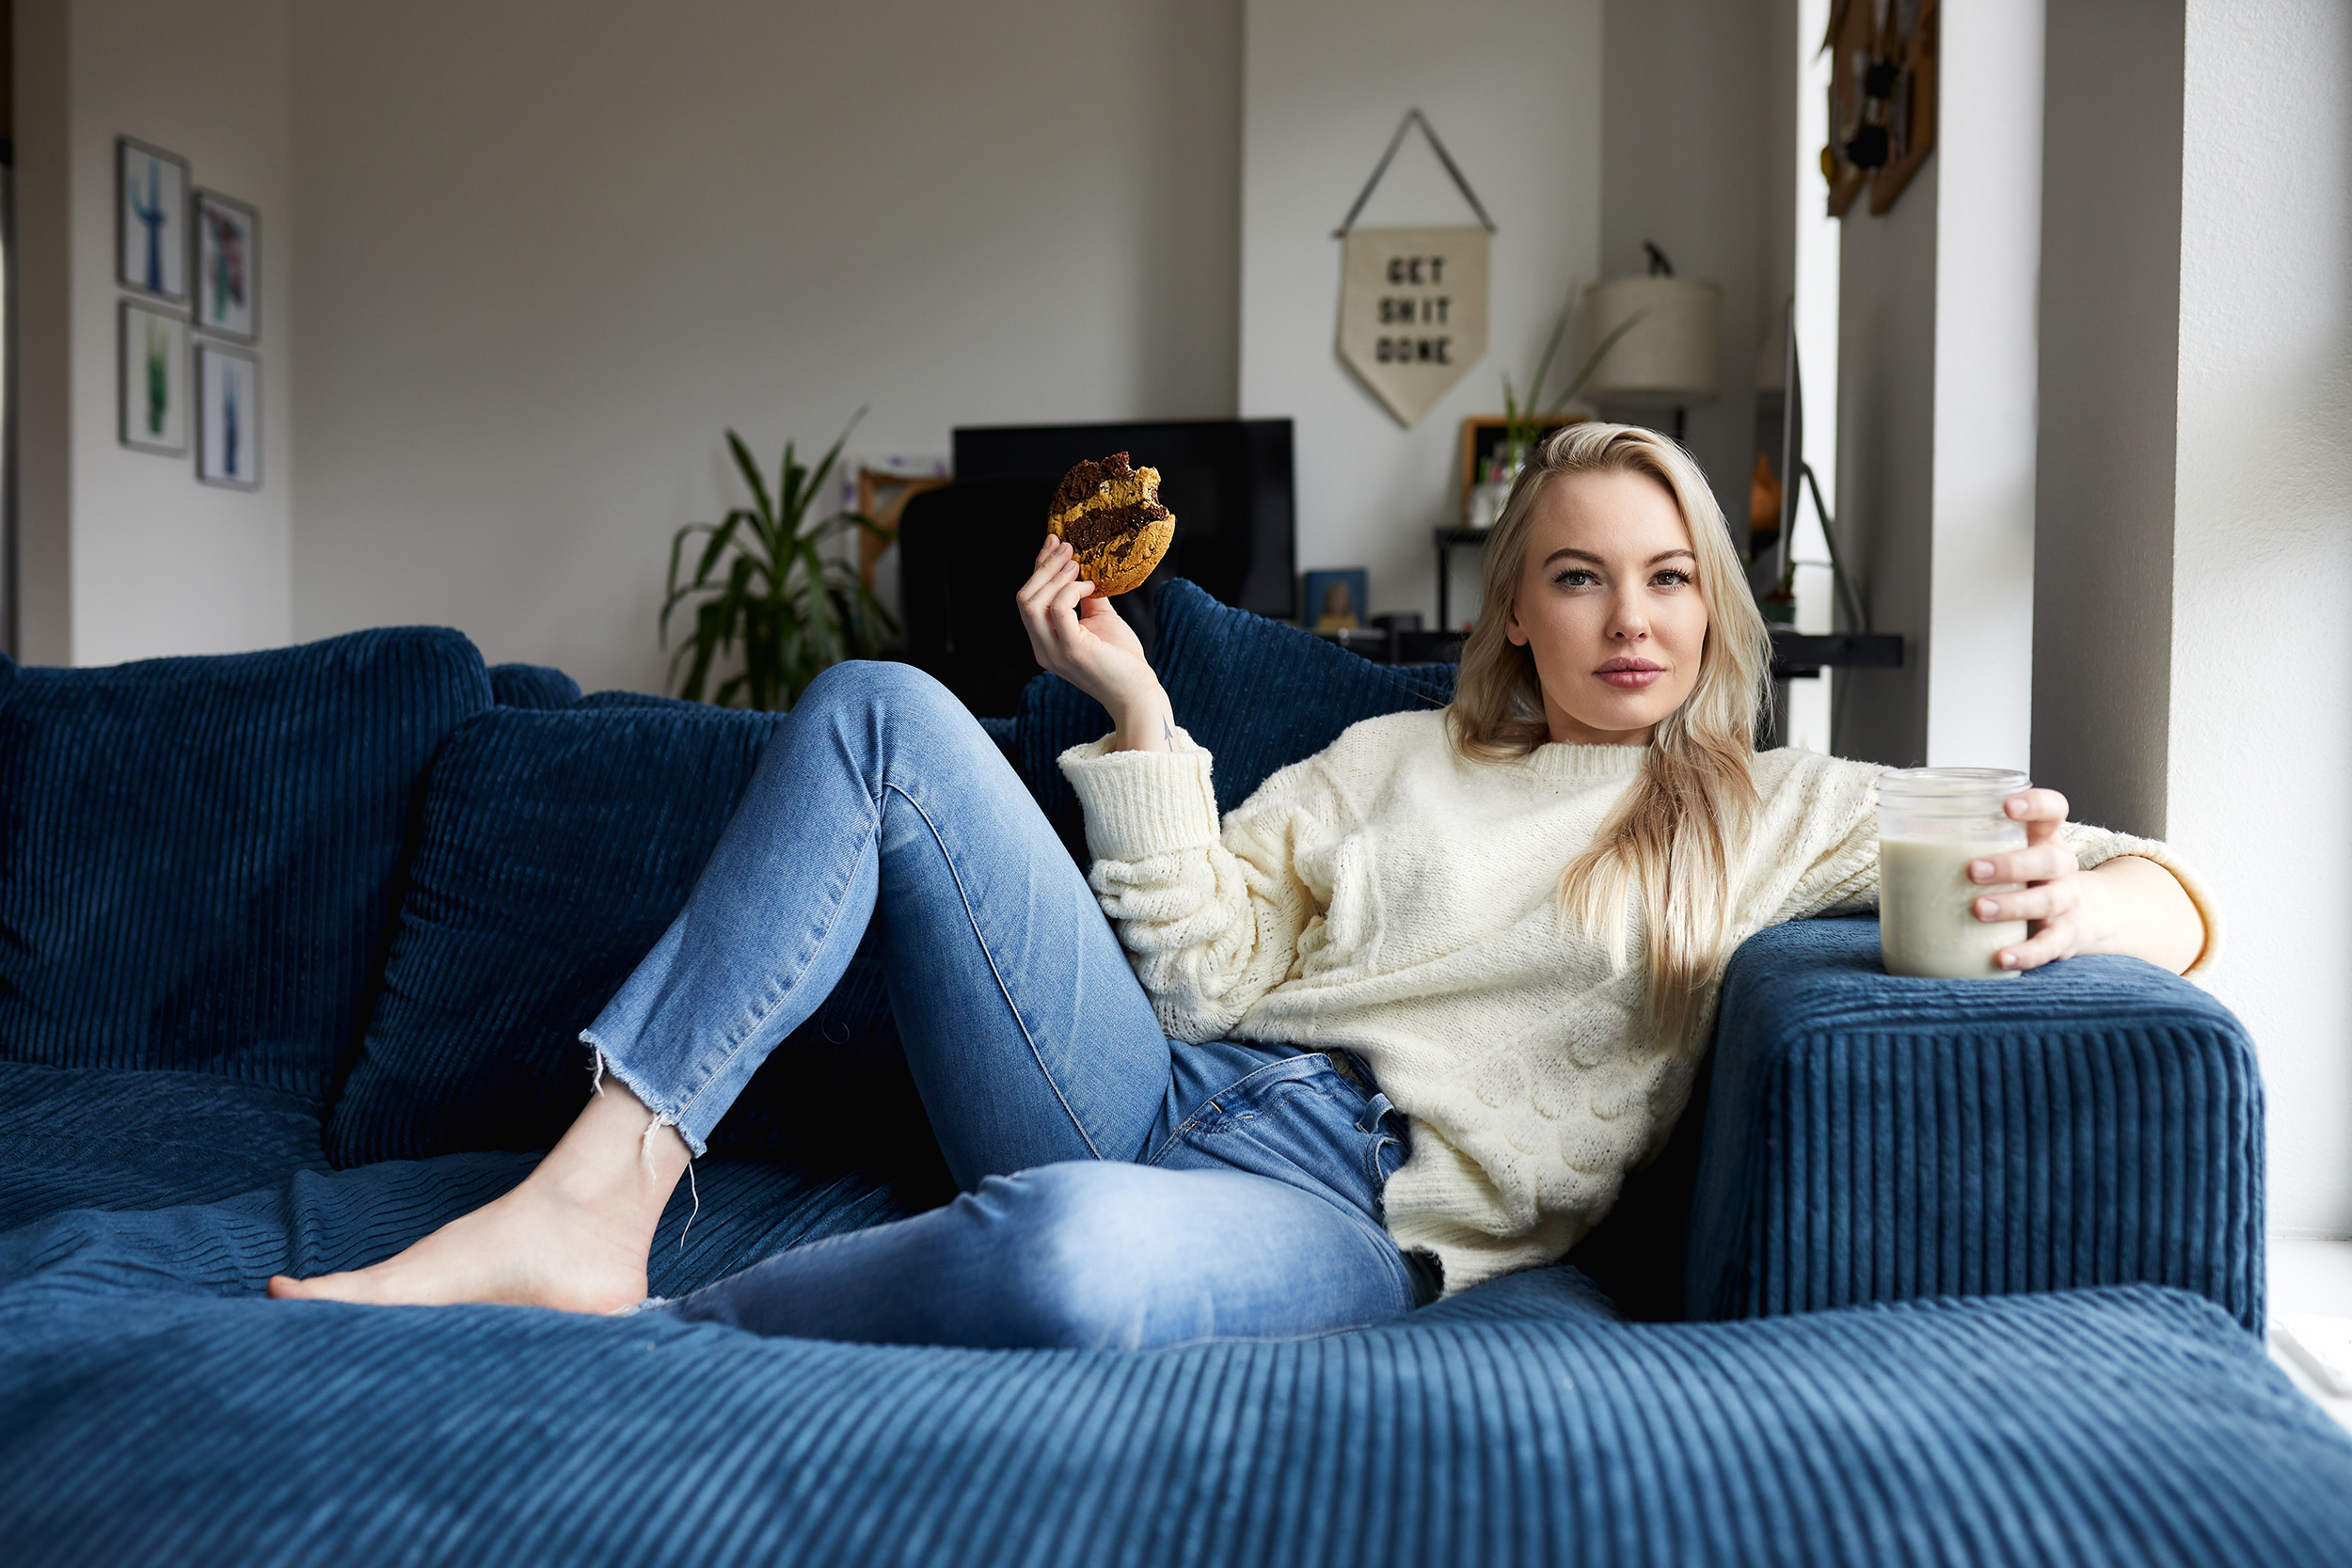 Portrait of lifestyle model eating cookies on a couch - John Robson Photography